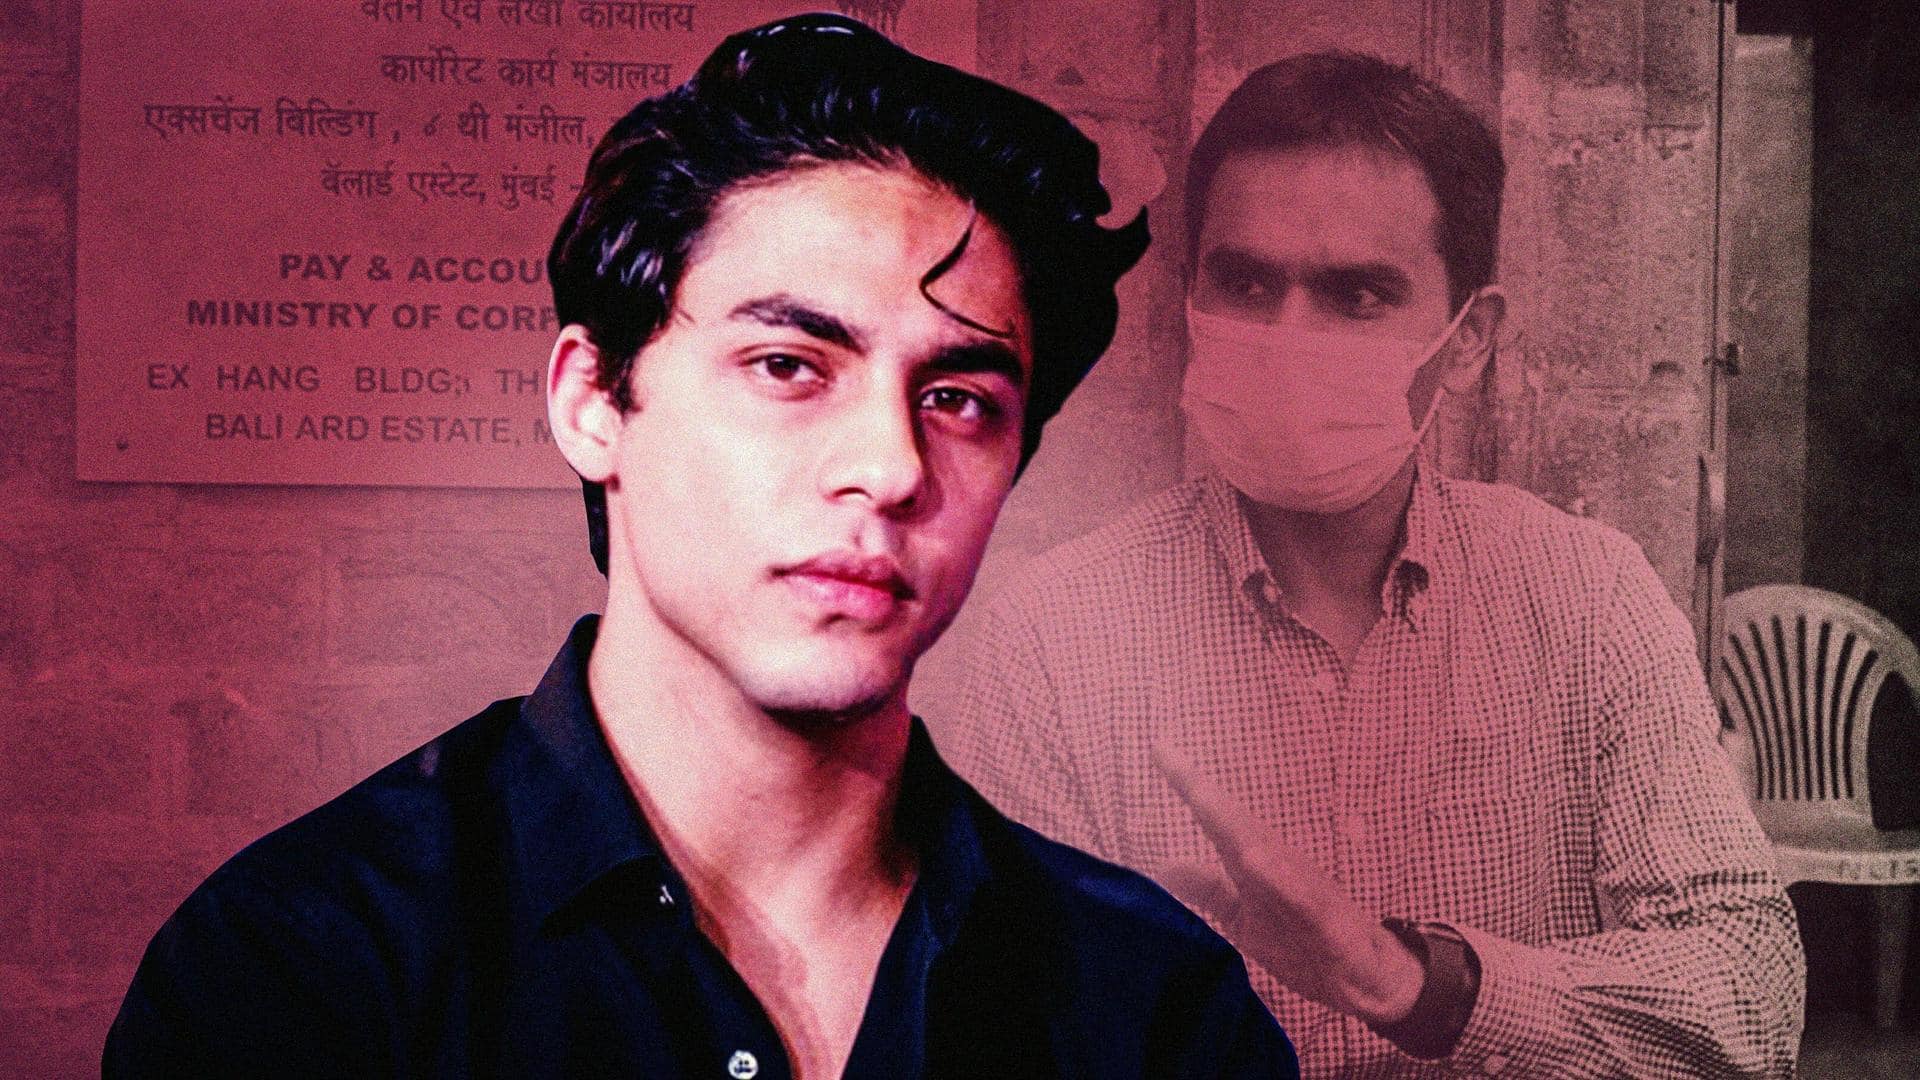 Aryan Khan case: Witness planned Rs. 25cr extortion, says CBI